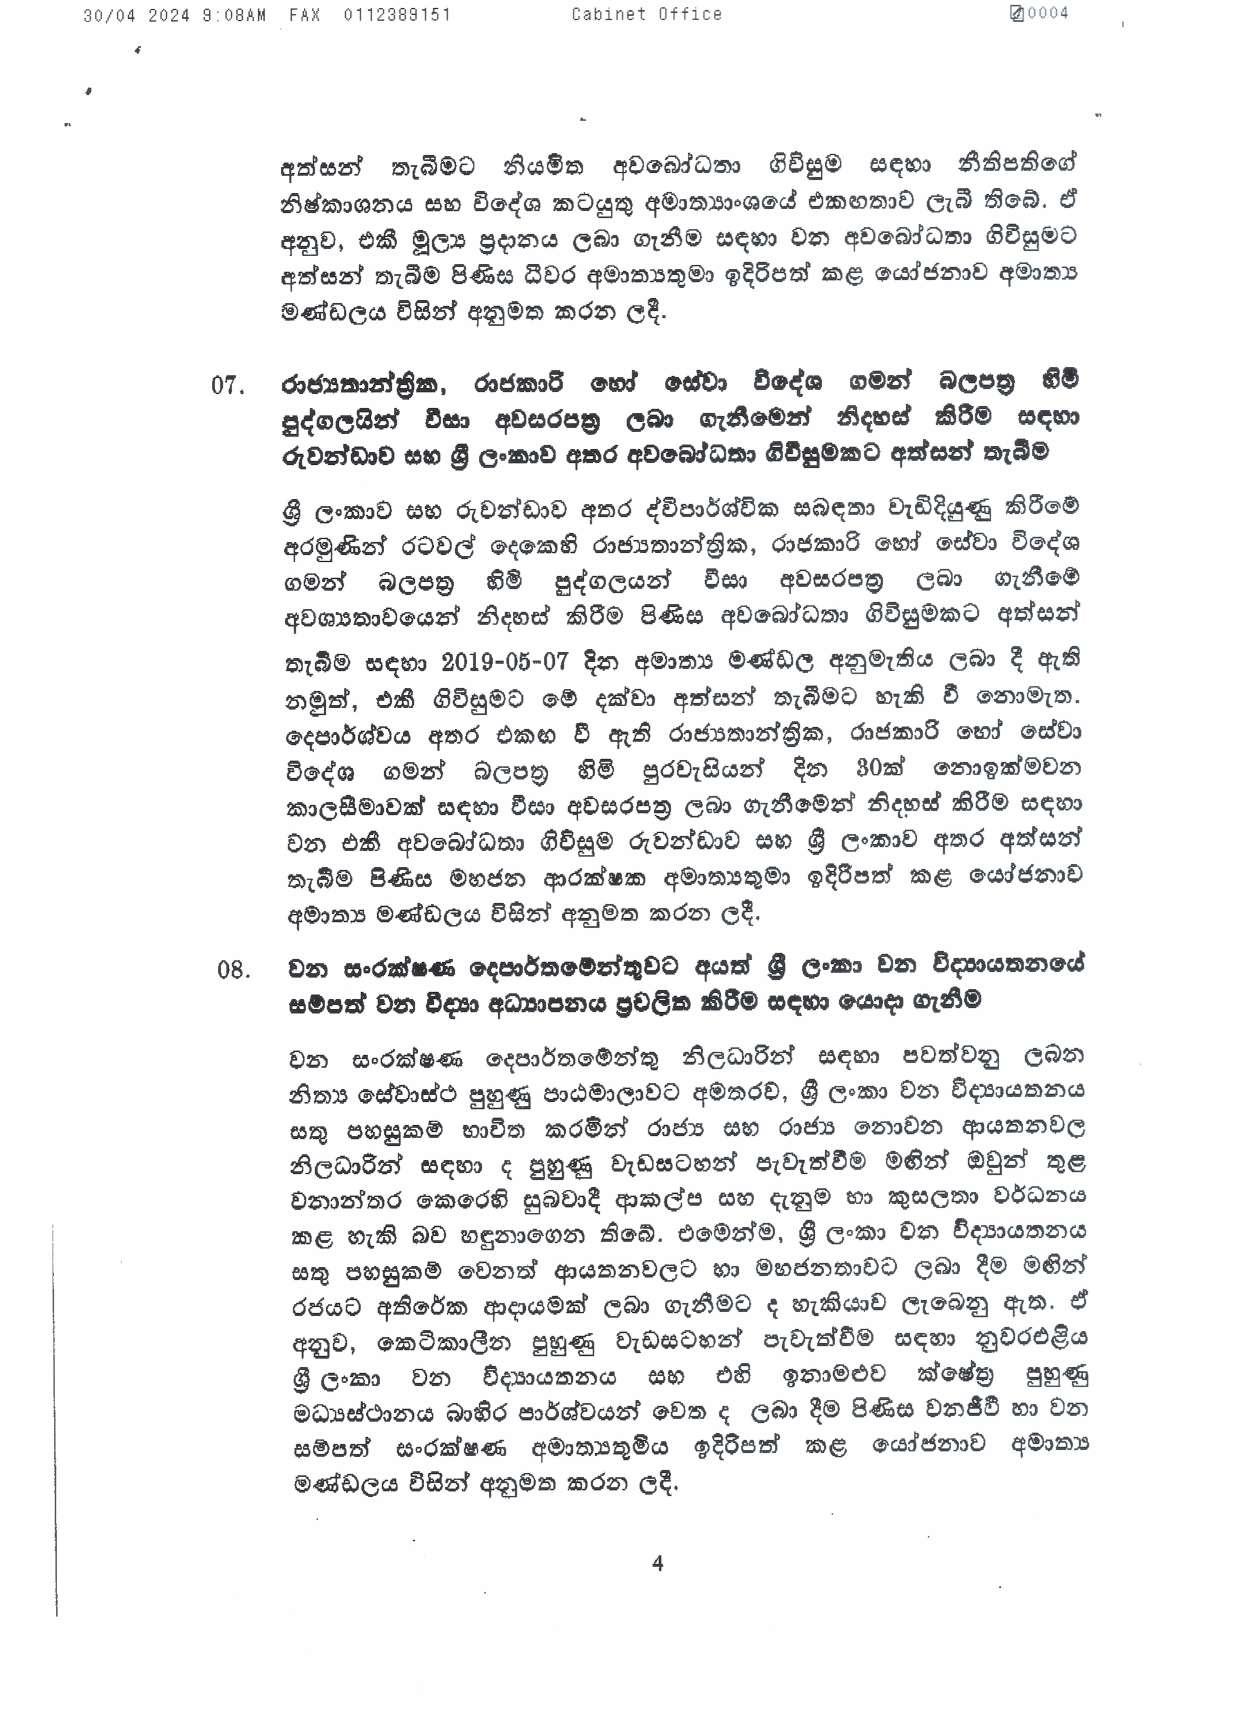 Cabinet Decision on 29.04.2024 page 004